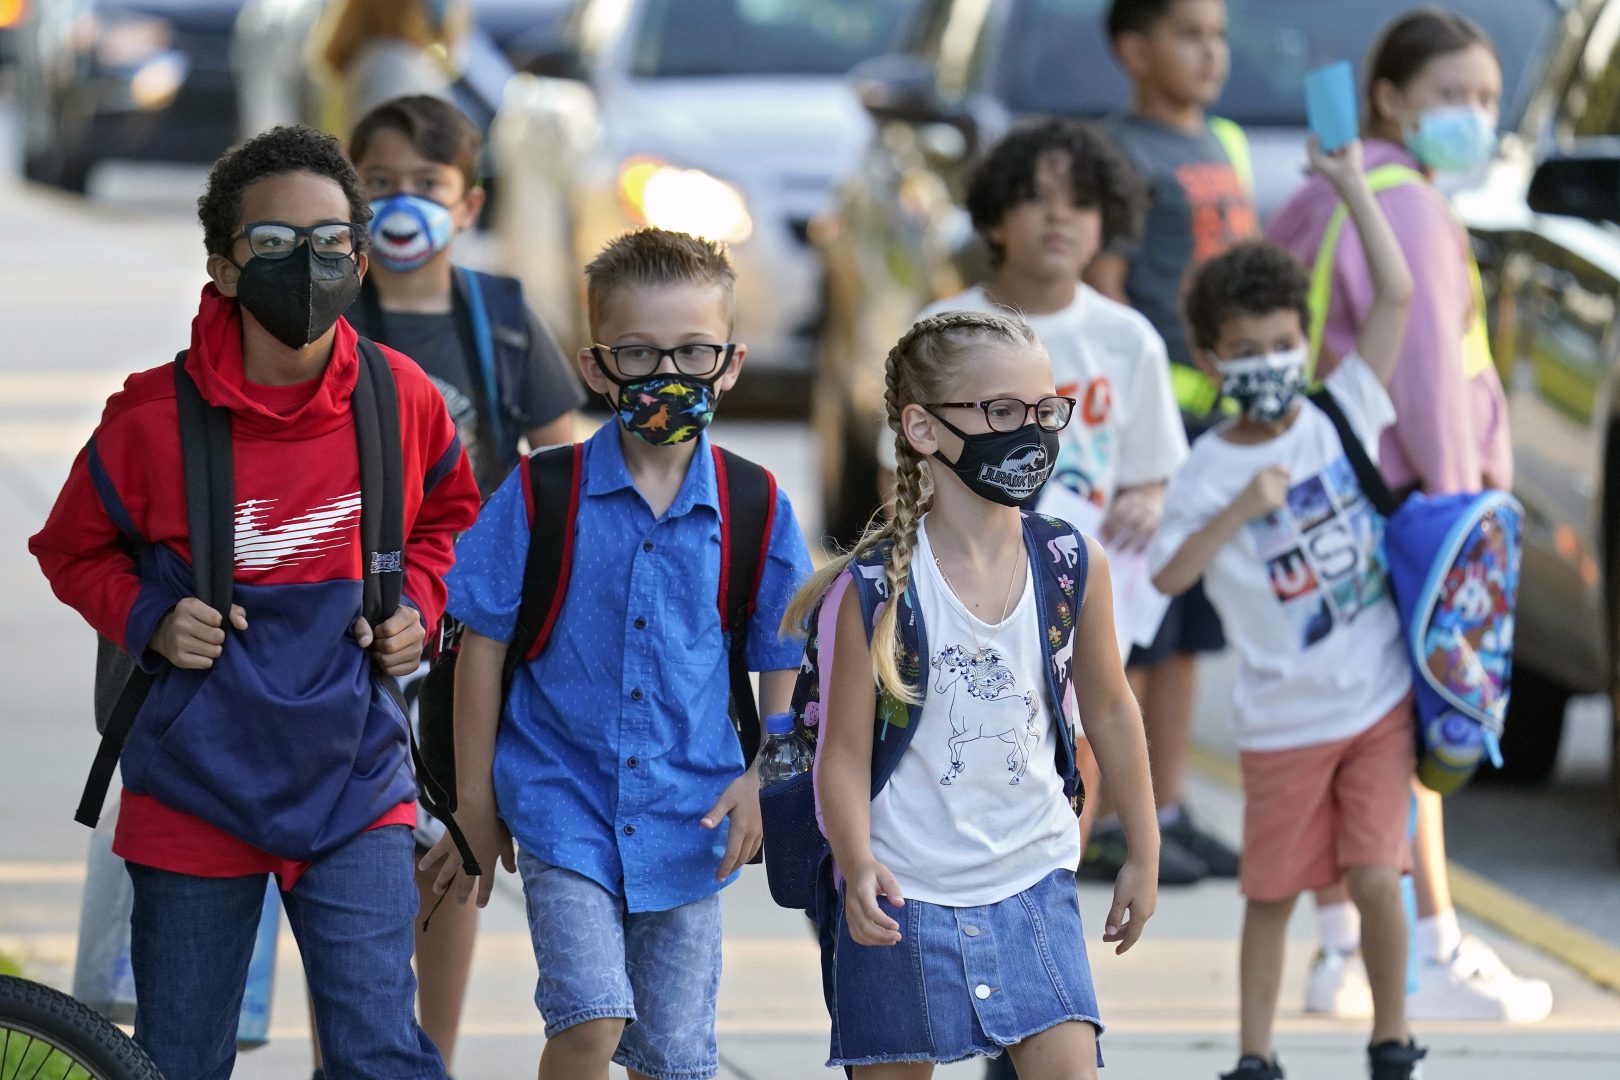 FILE PHOTO: In this Tuesday, Aug. 10, 2021, file photo, students, some wearing protective masks, arrive for the first day of school at Sessums Elementary School in Riverview, Fla.